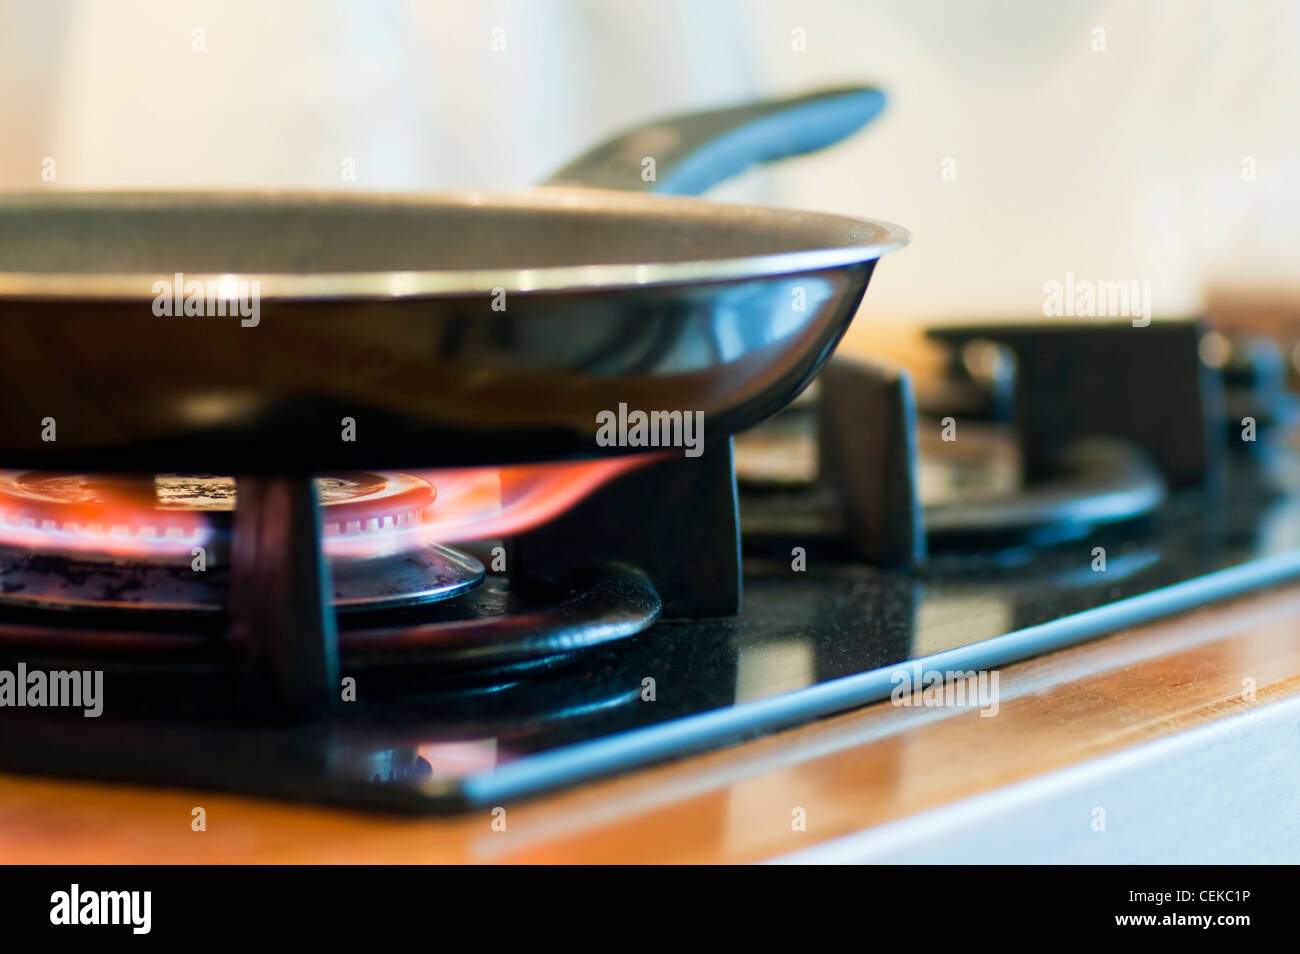 A gas cooker with frying pan on Stock Photo